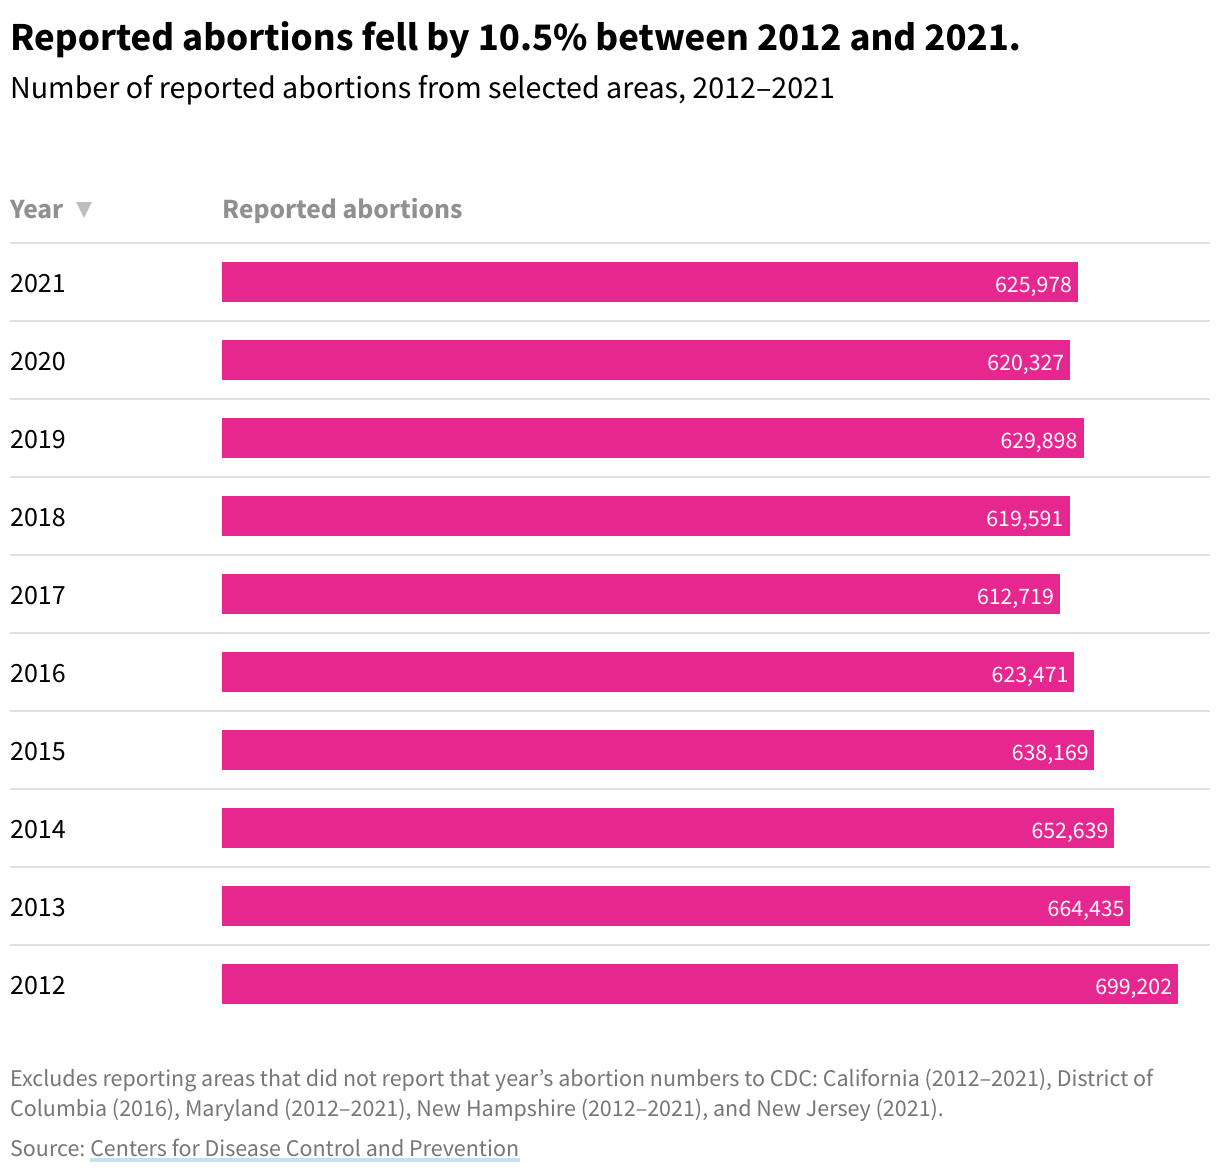 A column chart depicting the annual total of reported abortions in the US between 2012 and 2021.